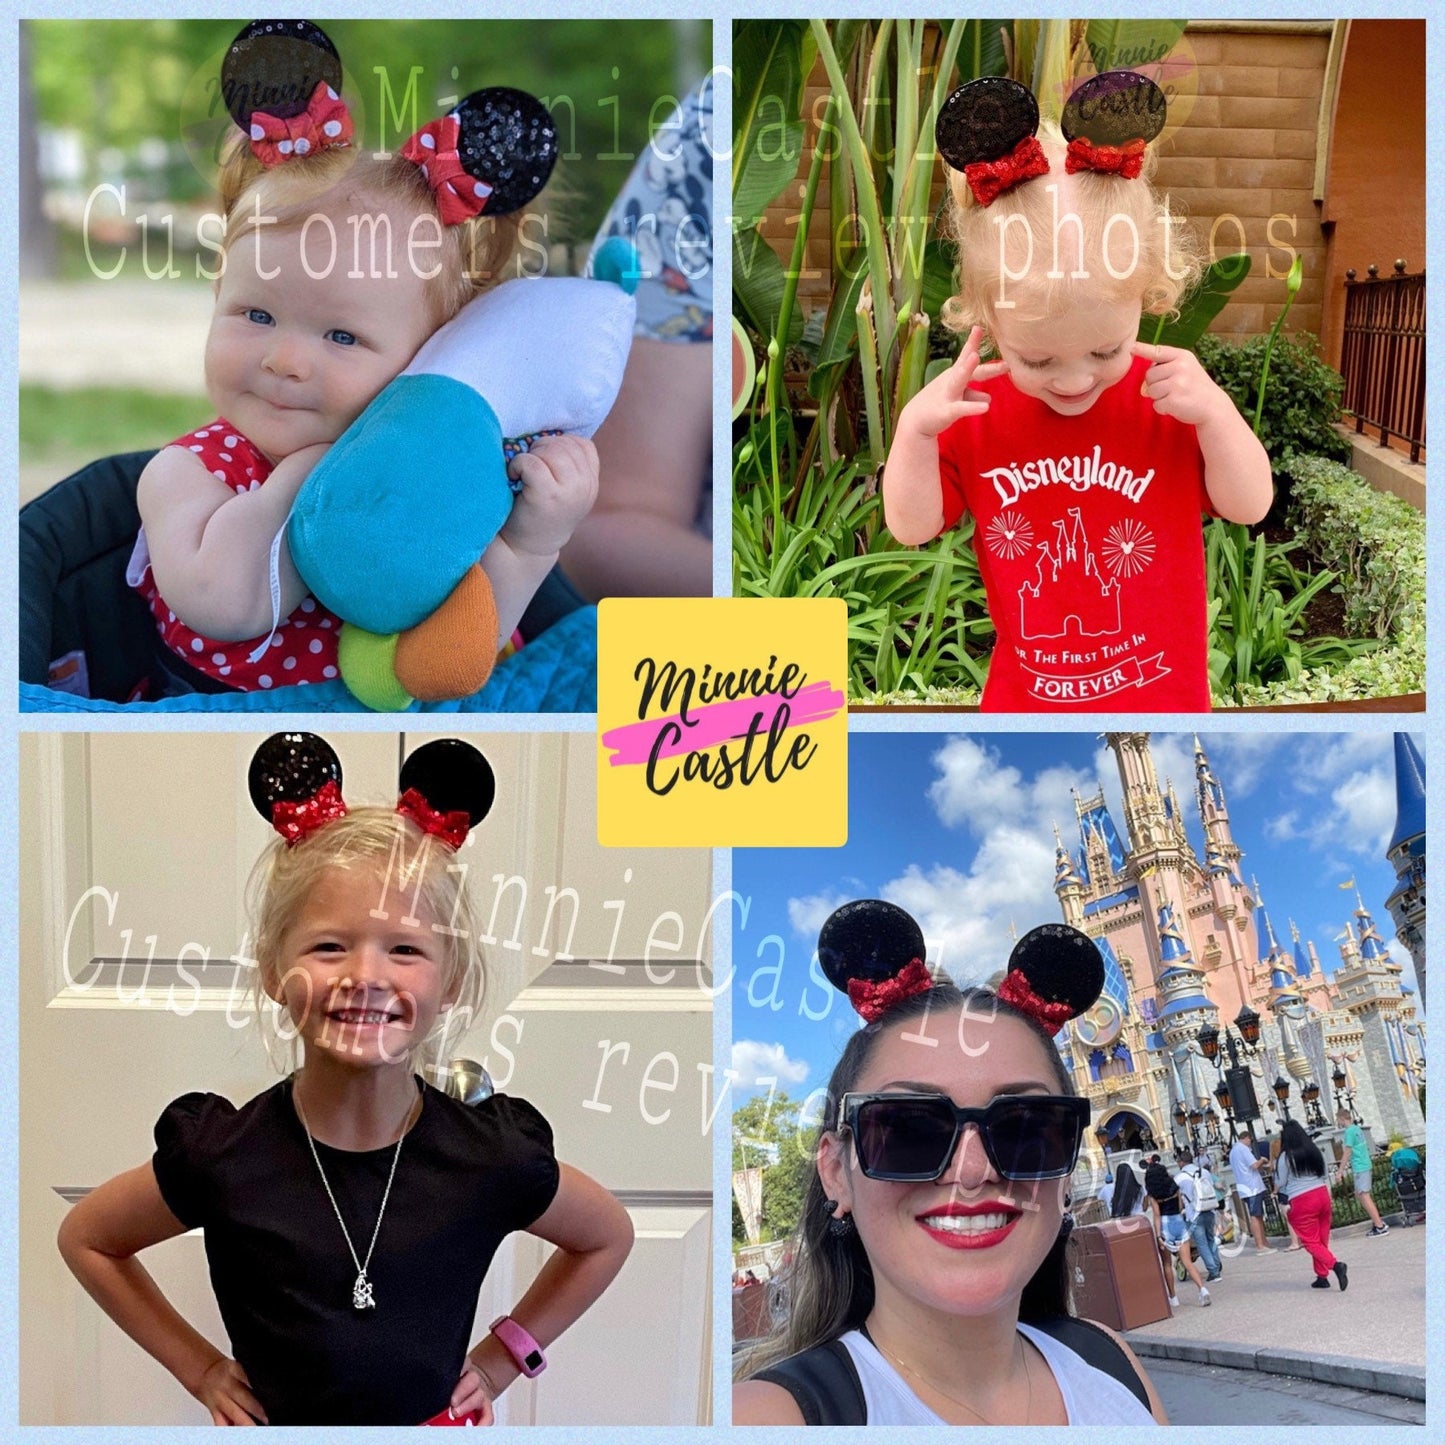 Valentines Day Mickey Ears Hair Clips